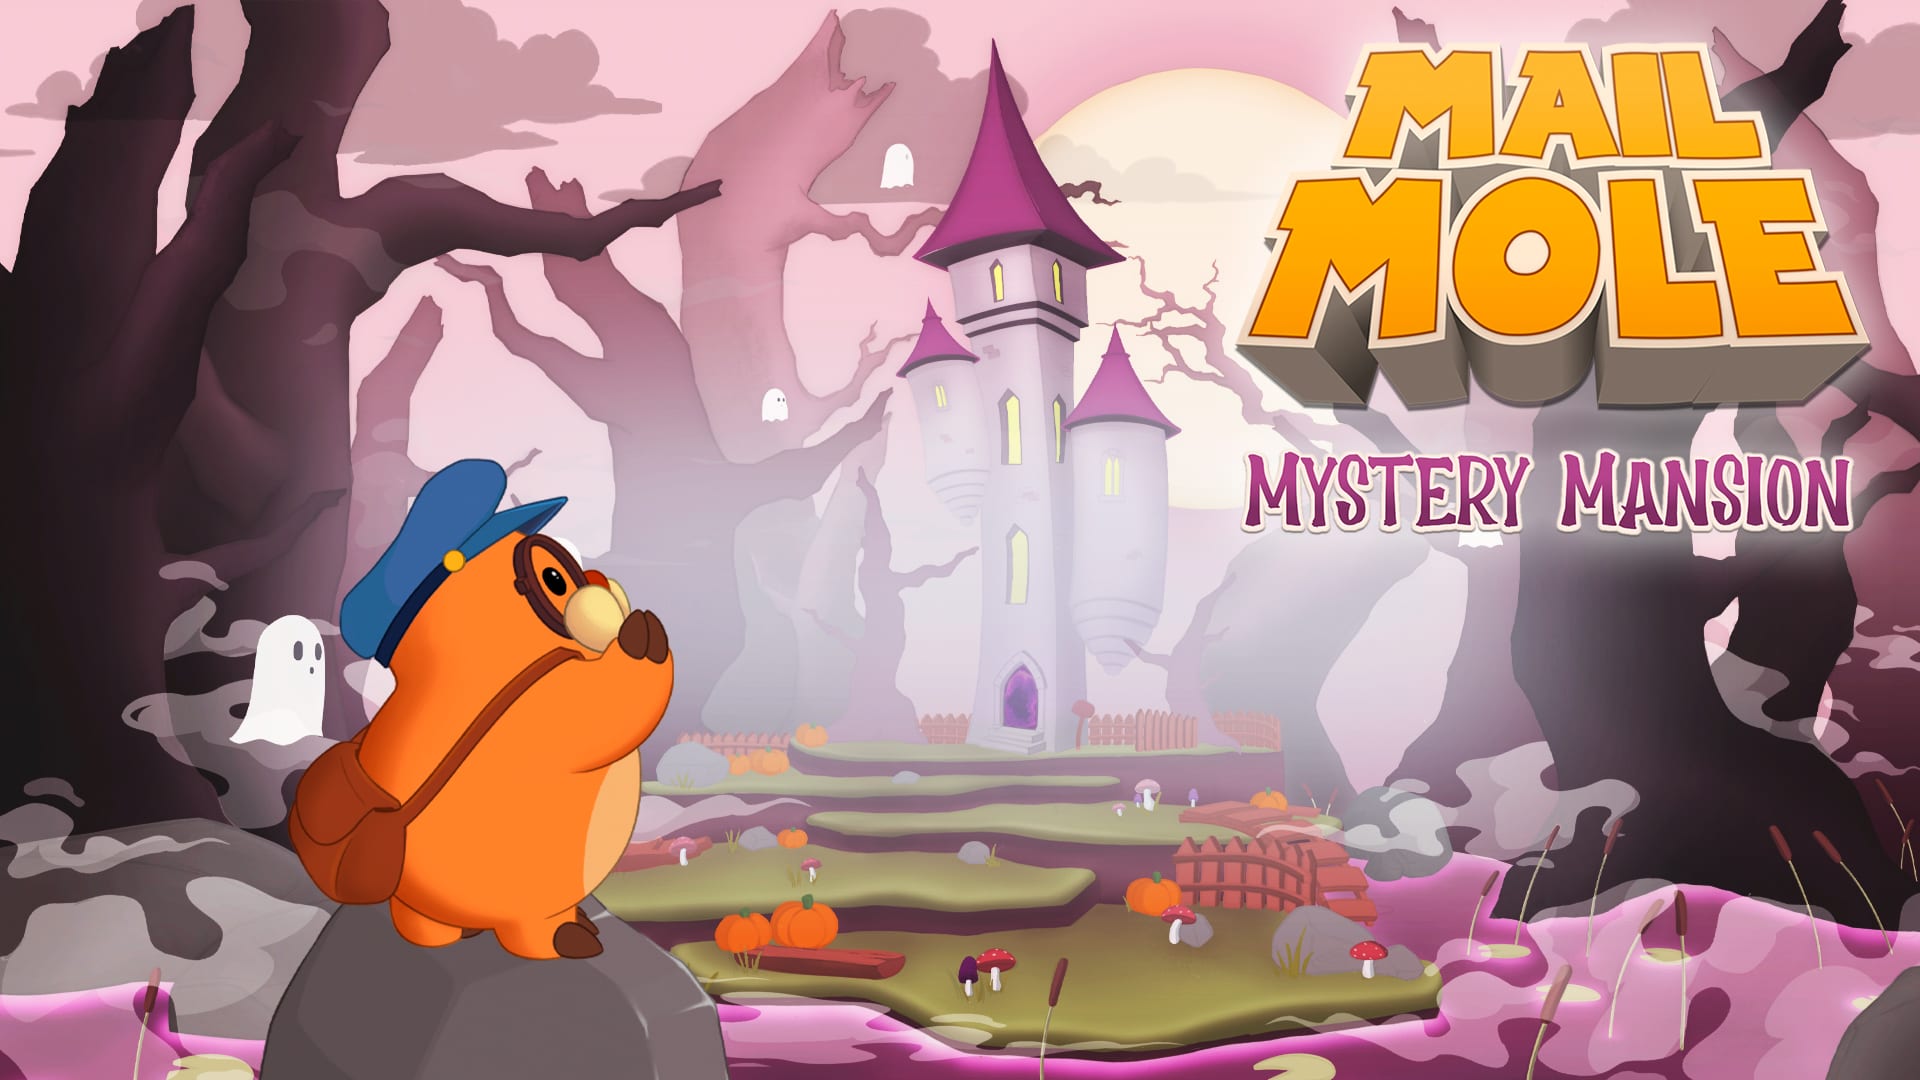 Mail Mole: Mystery Mansion